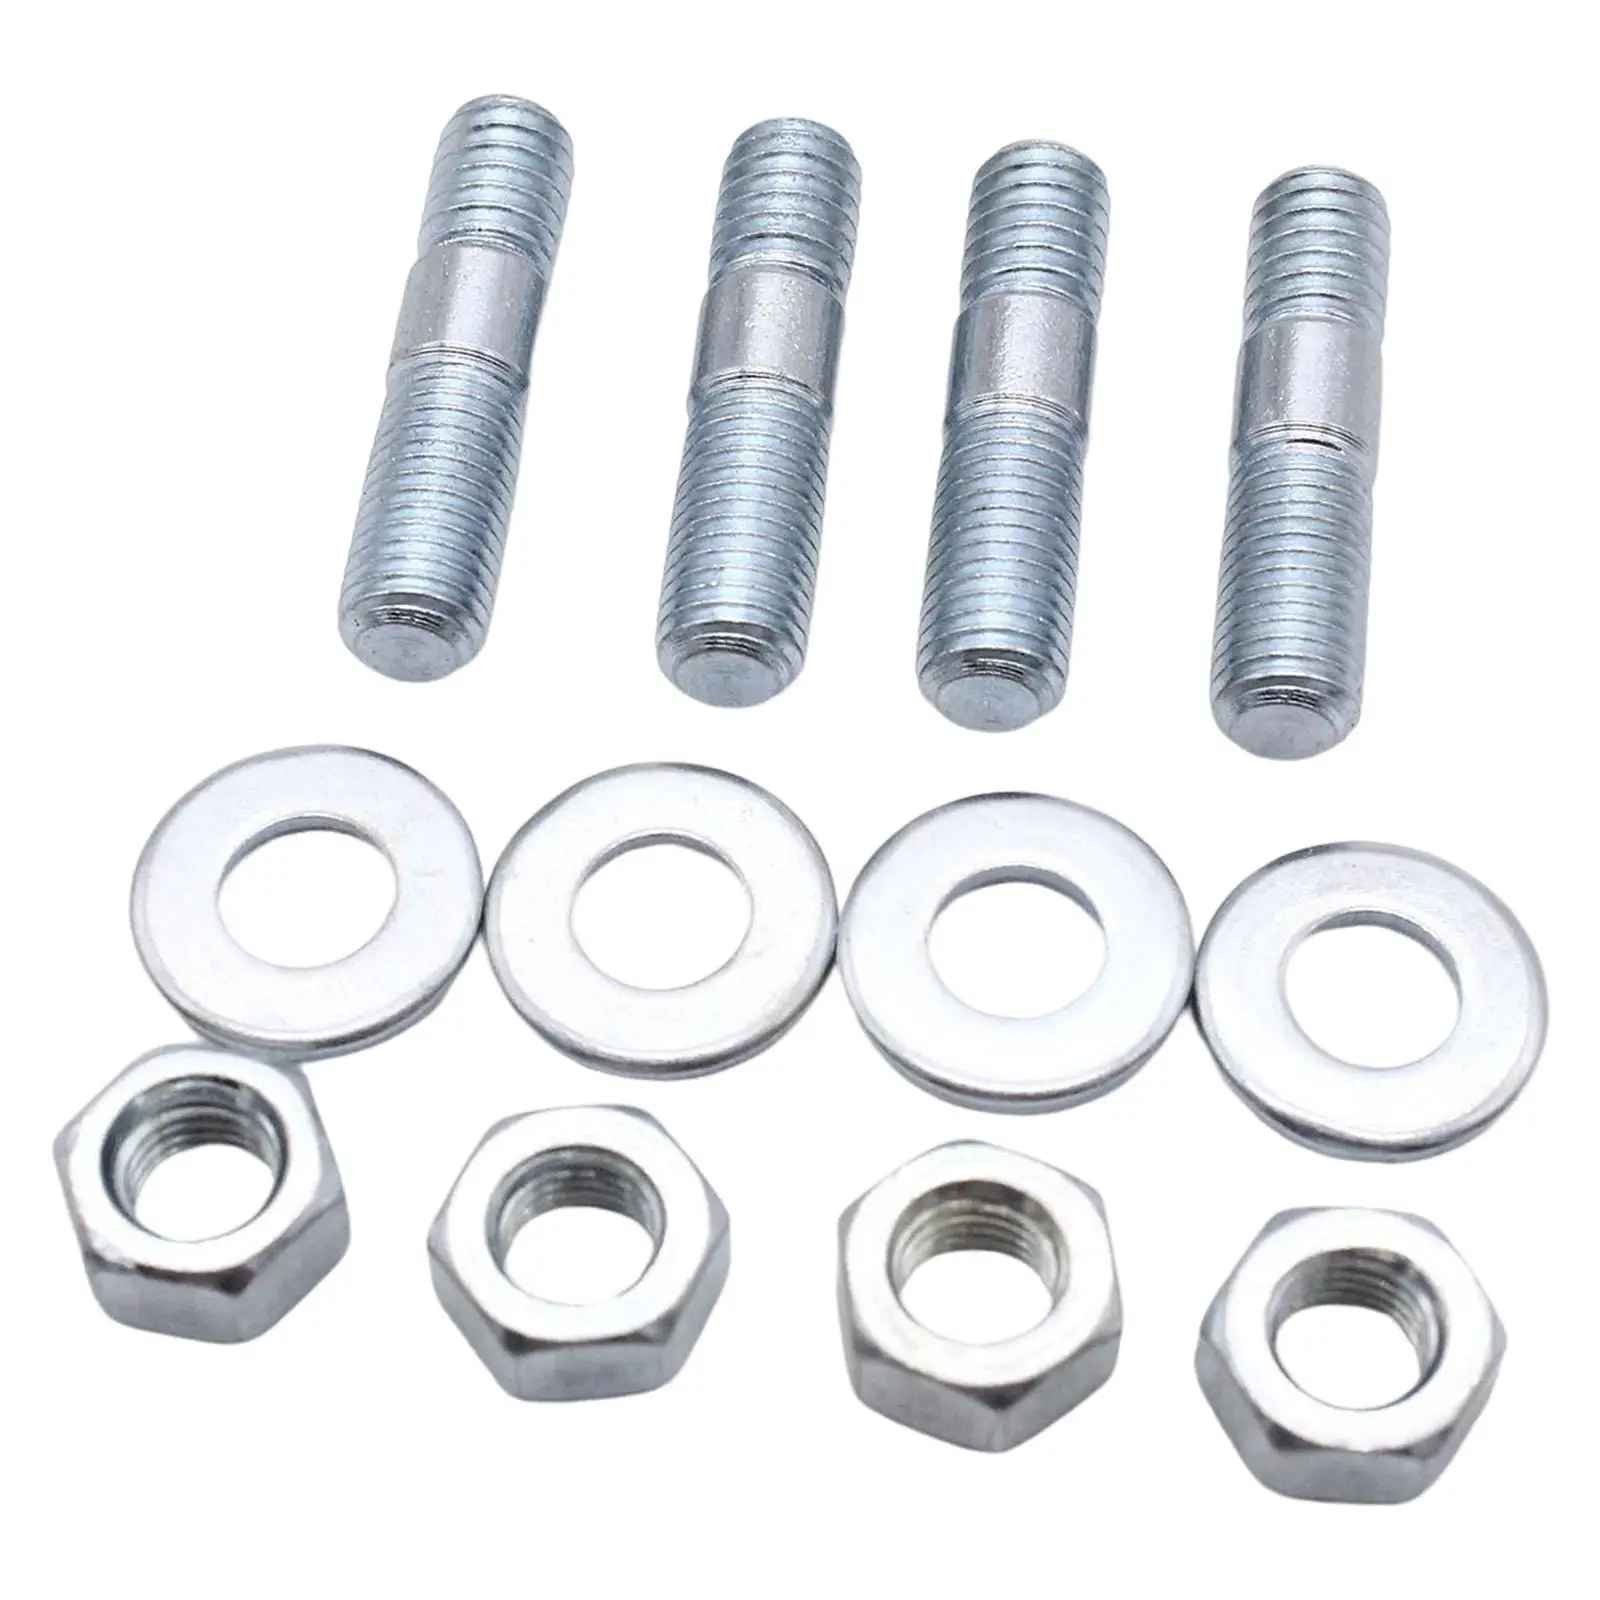 Carburetor Stud Kit Carb Spacer Stud Kit 5/16in Threads for Vehicle Parts Spare Parts Replace Accessories Easy to Install